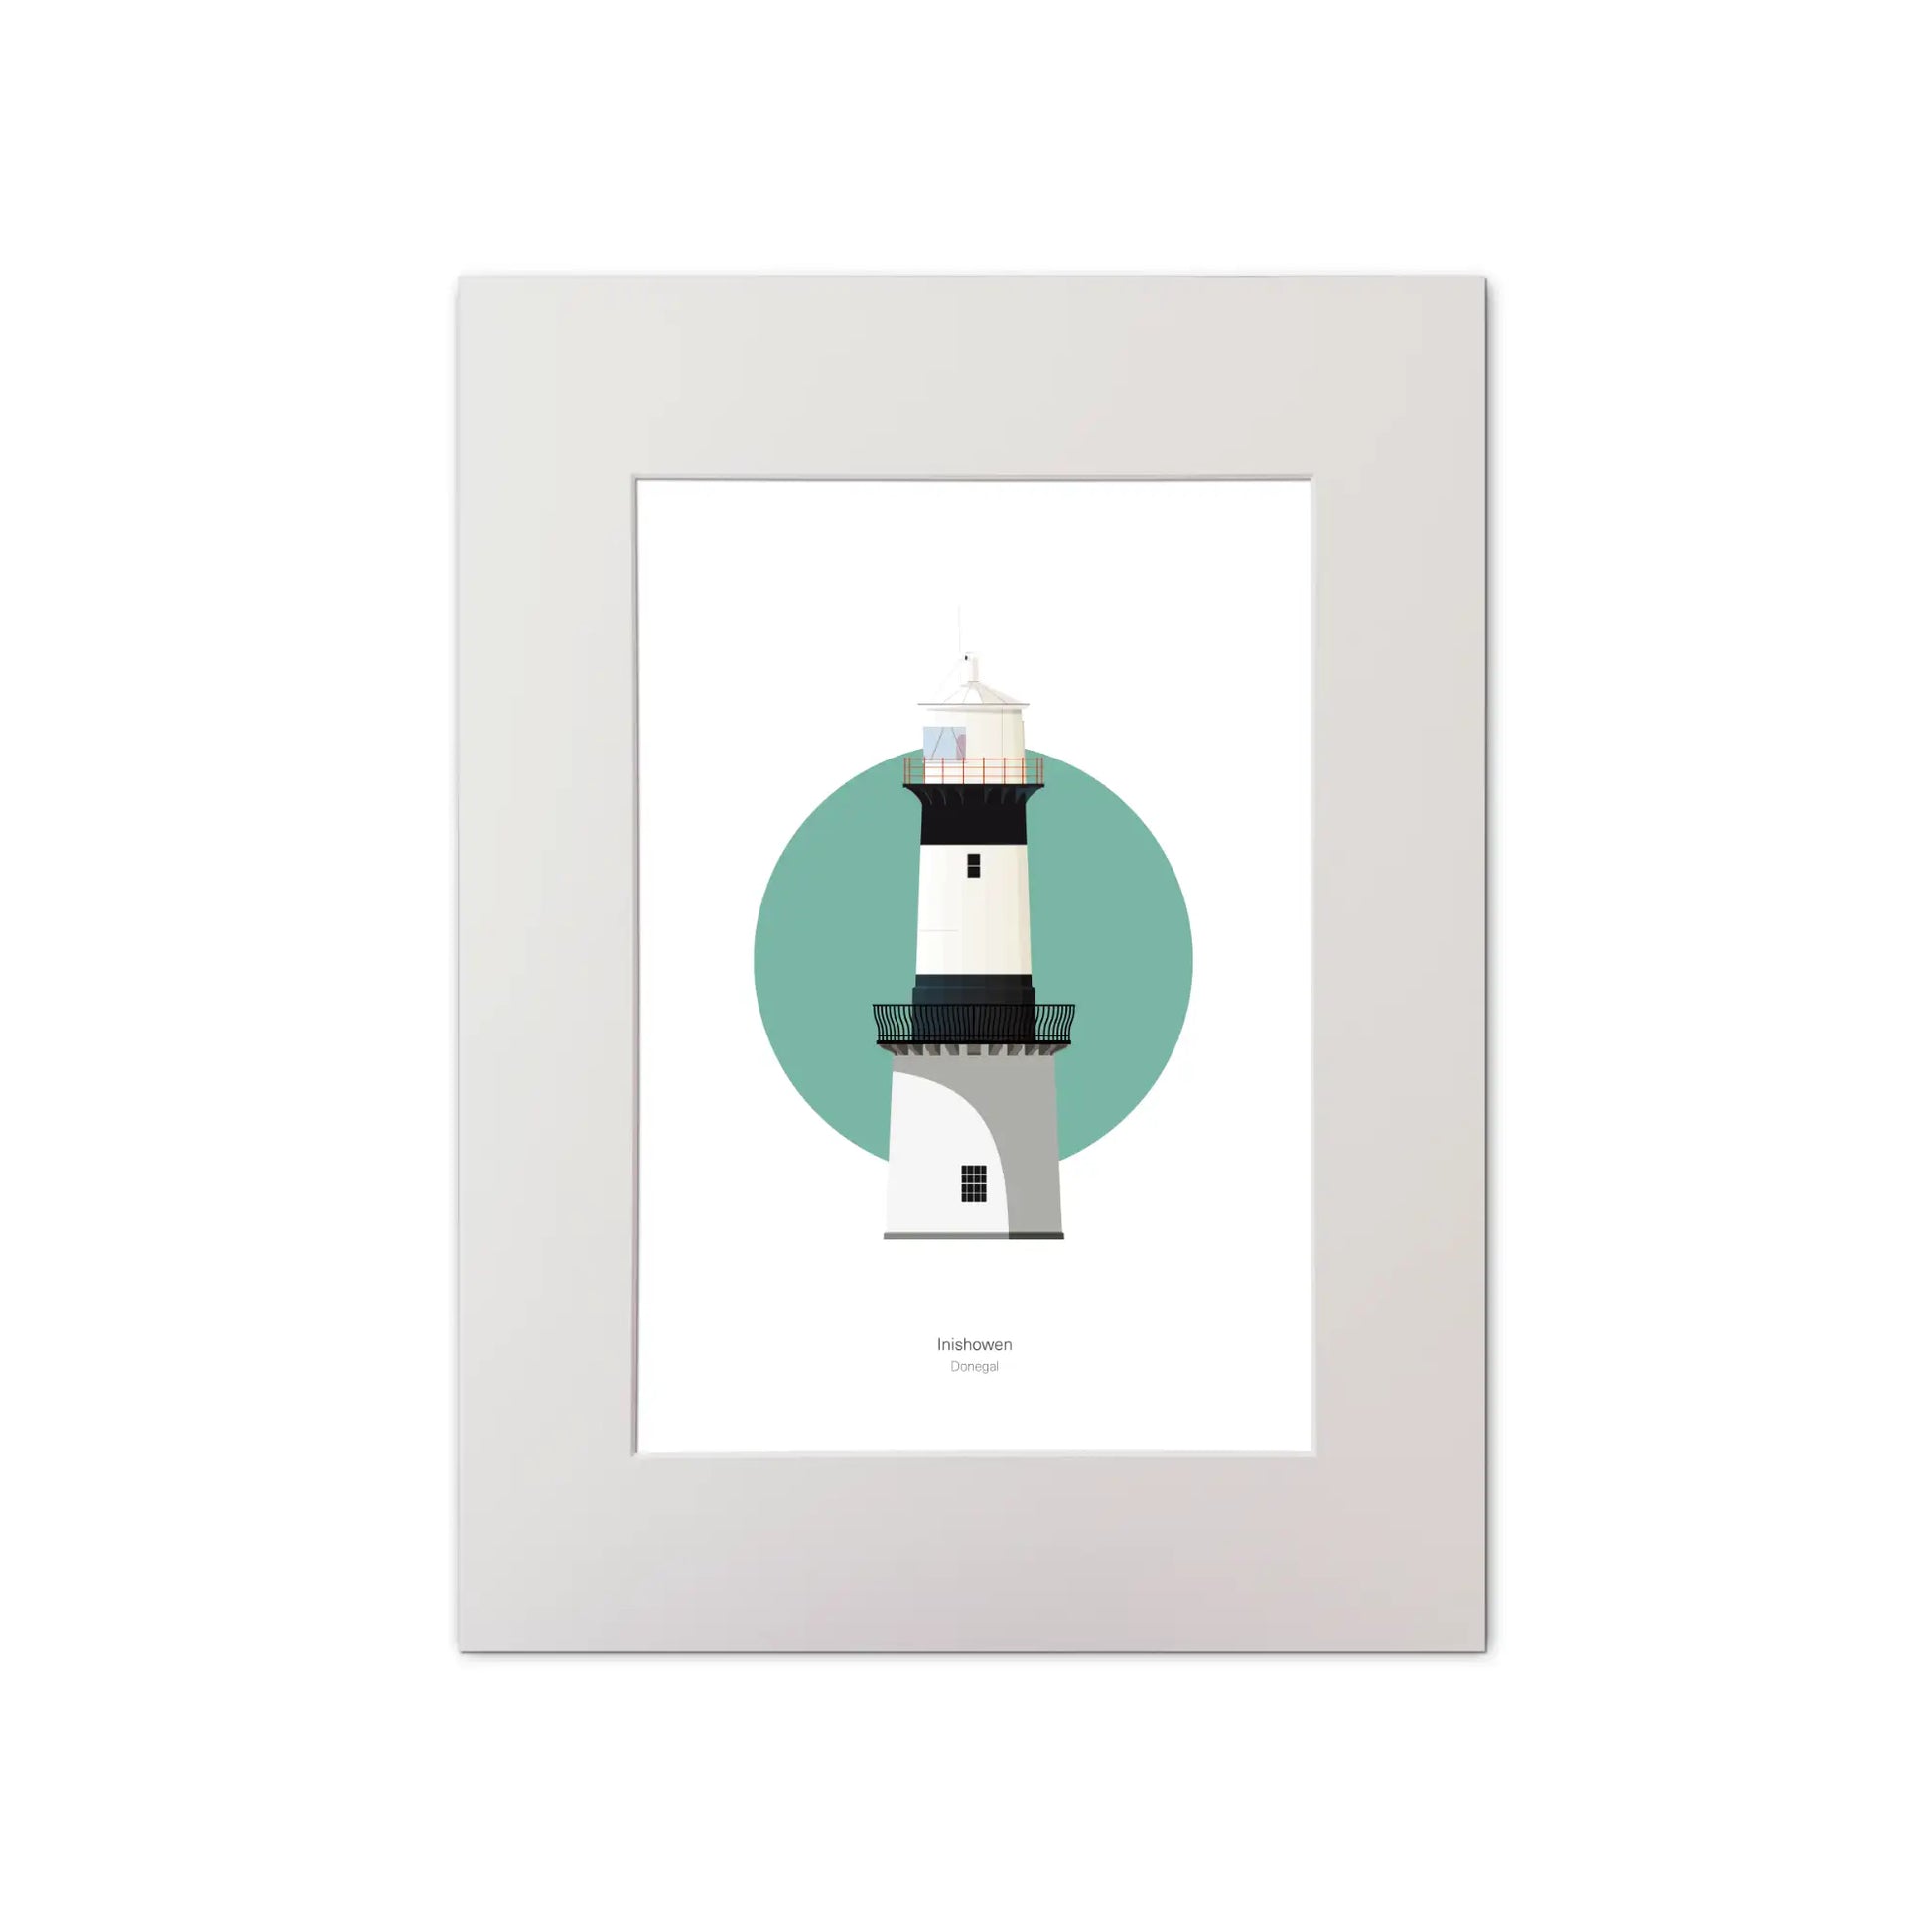 Illustration of Inishowen lighthouse on a white background inside light blue square, mounted and measuring 30x40cm.